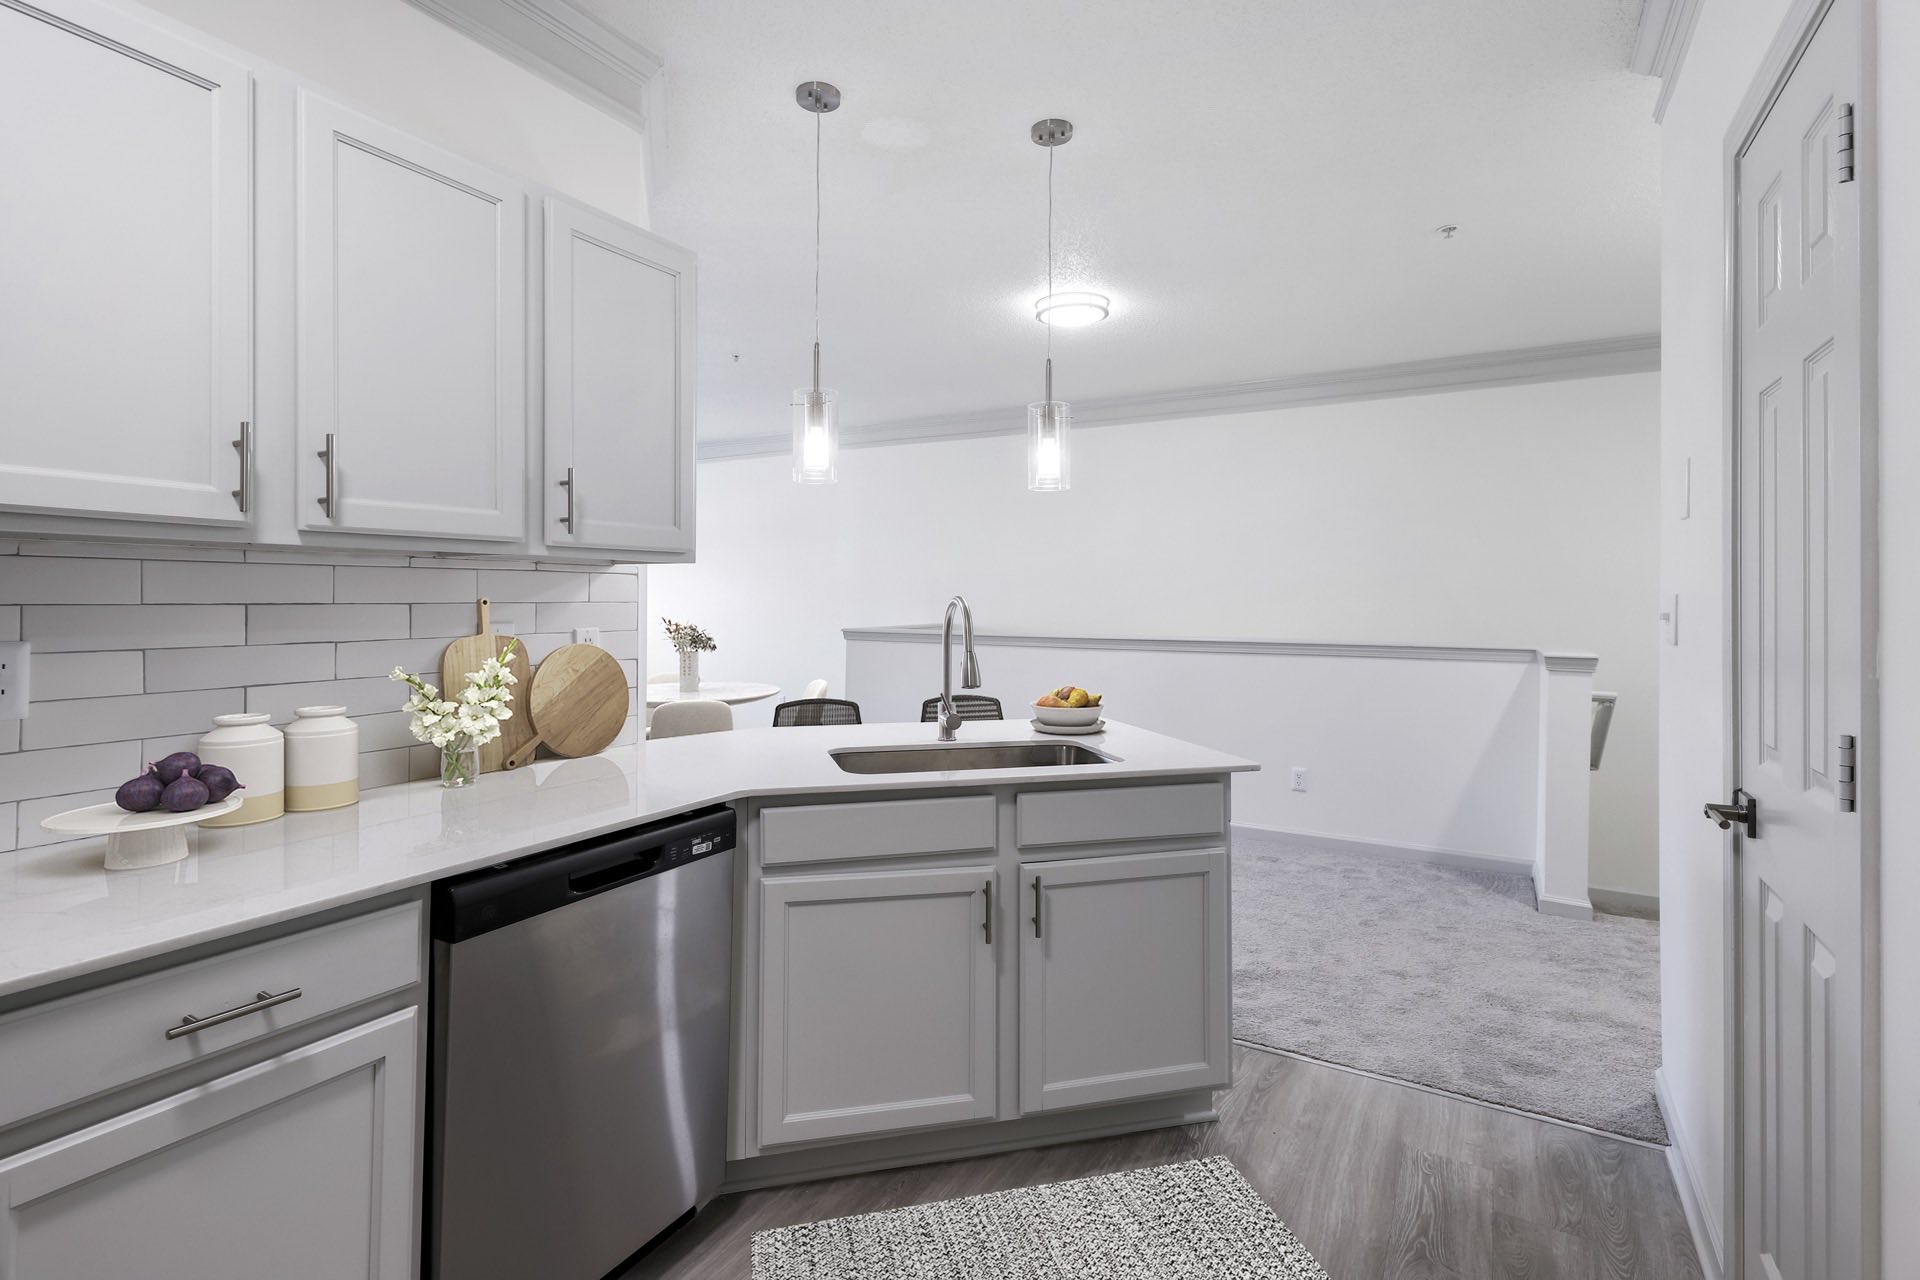 kitchen with white shaker cabinets with brushed nickel accents